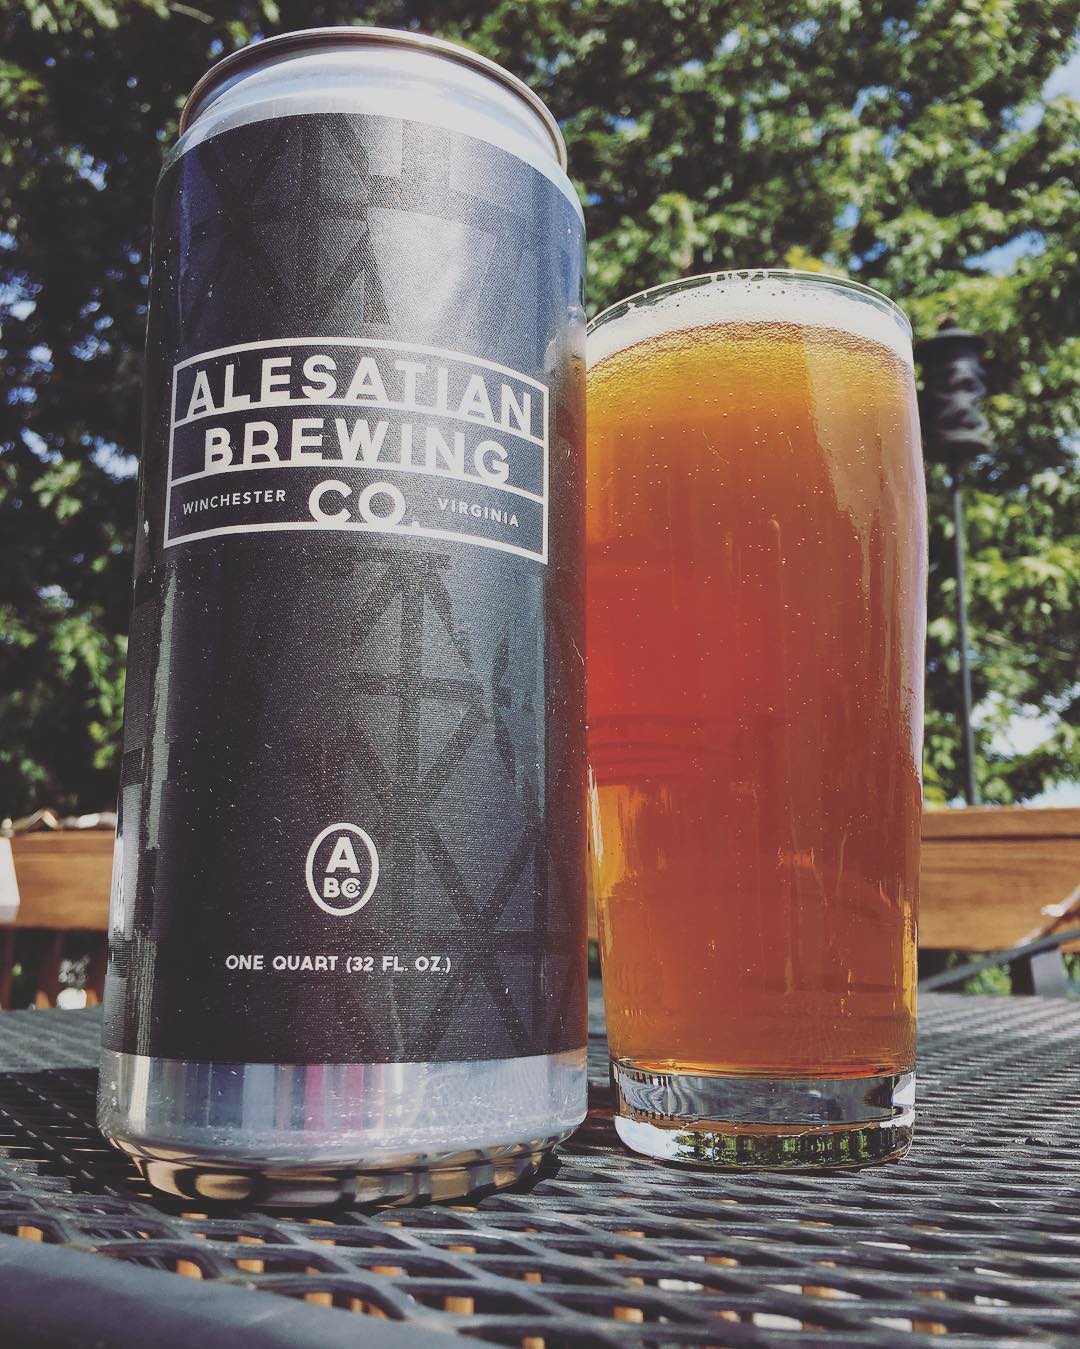 Alesatian Brewing Co. crowler can with custom label design and full beer glass